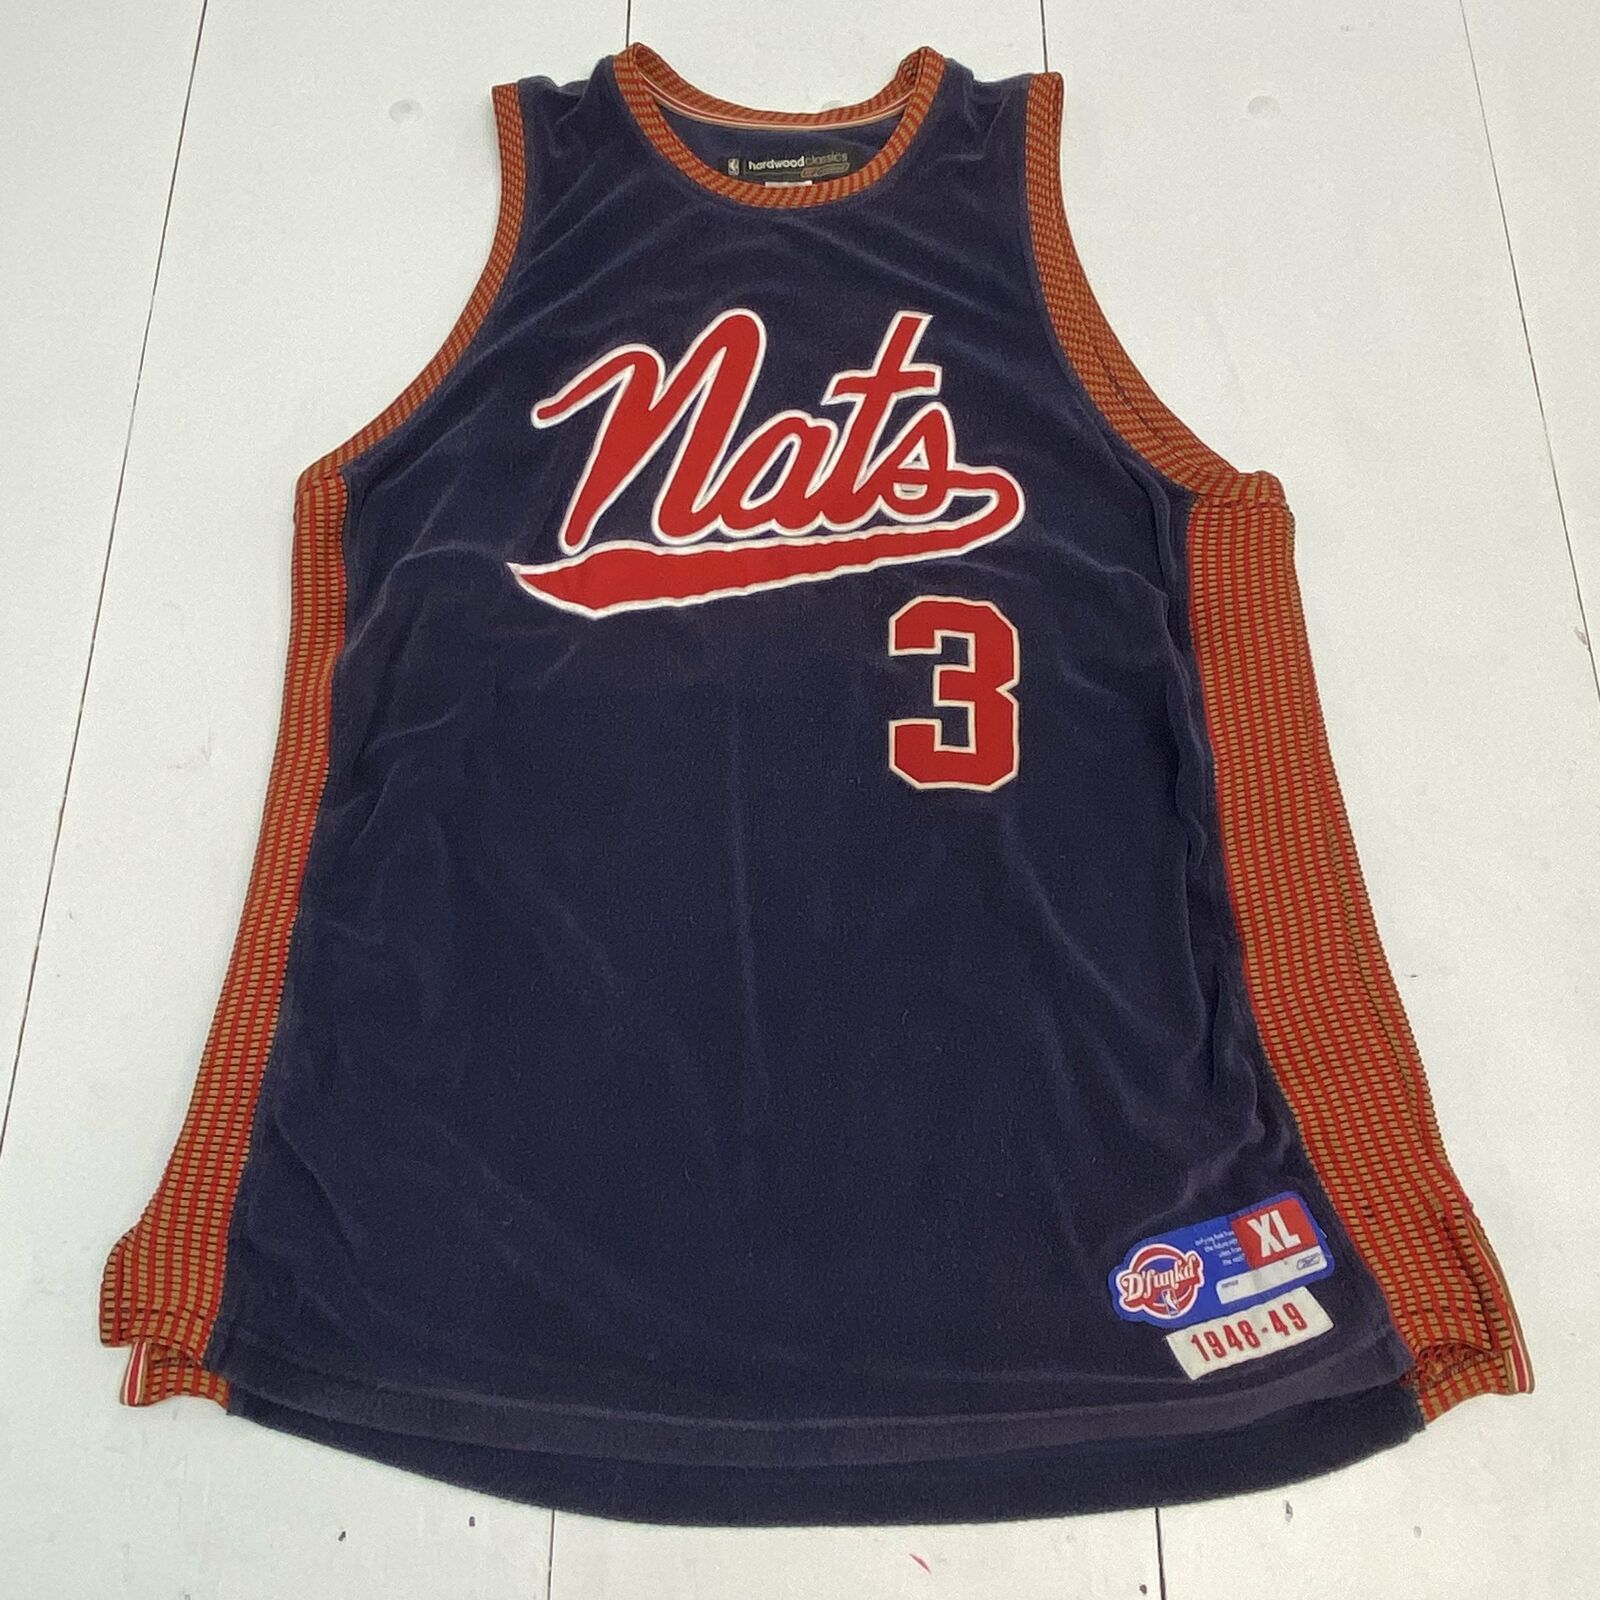 nats home jersey